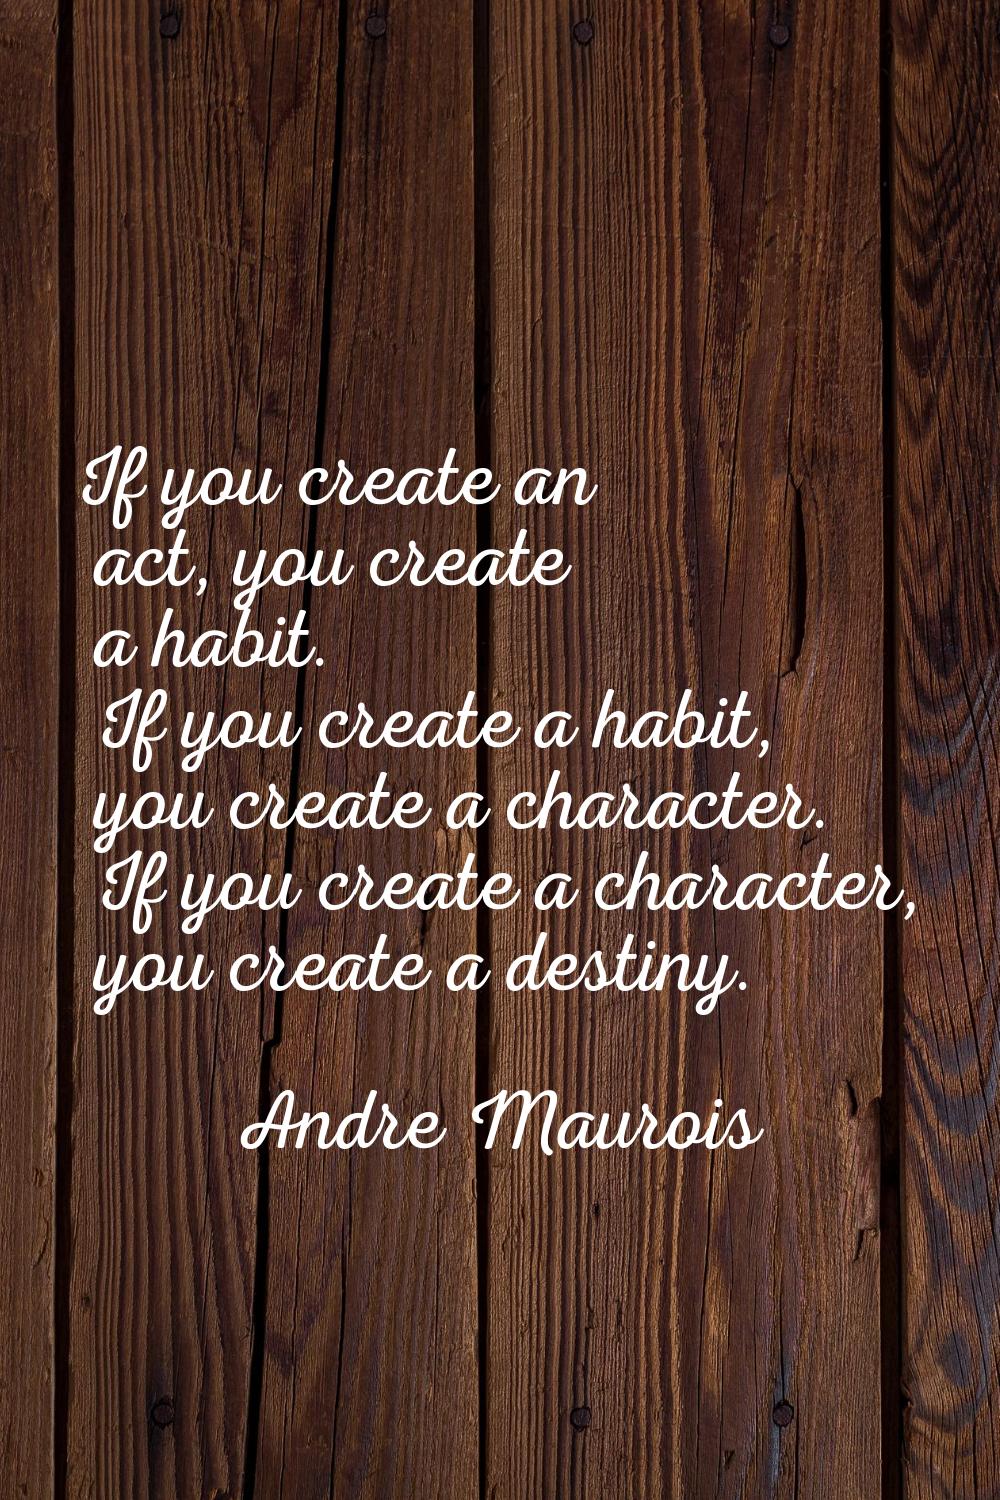 If you create an act, you create a habit. If you create a habit, you create a character. If you cre